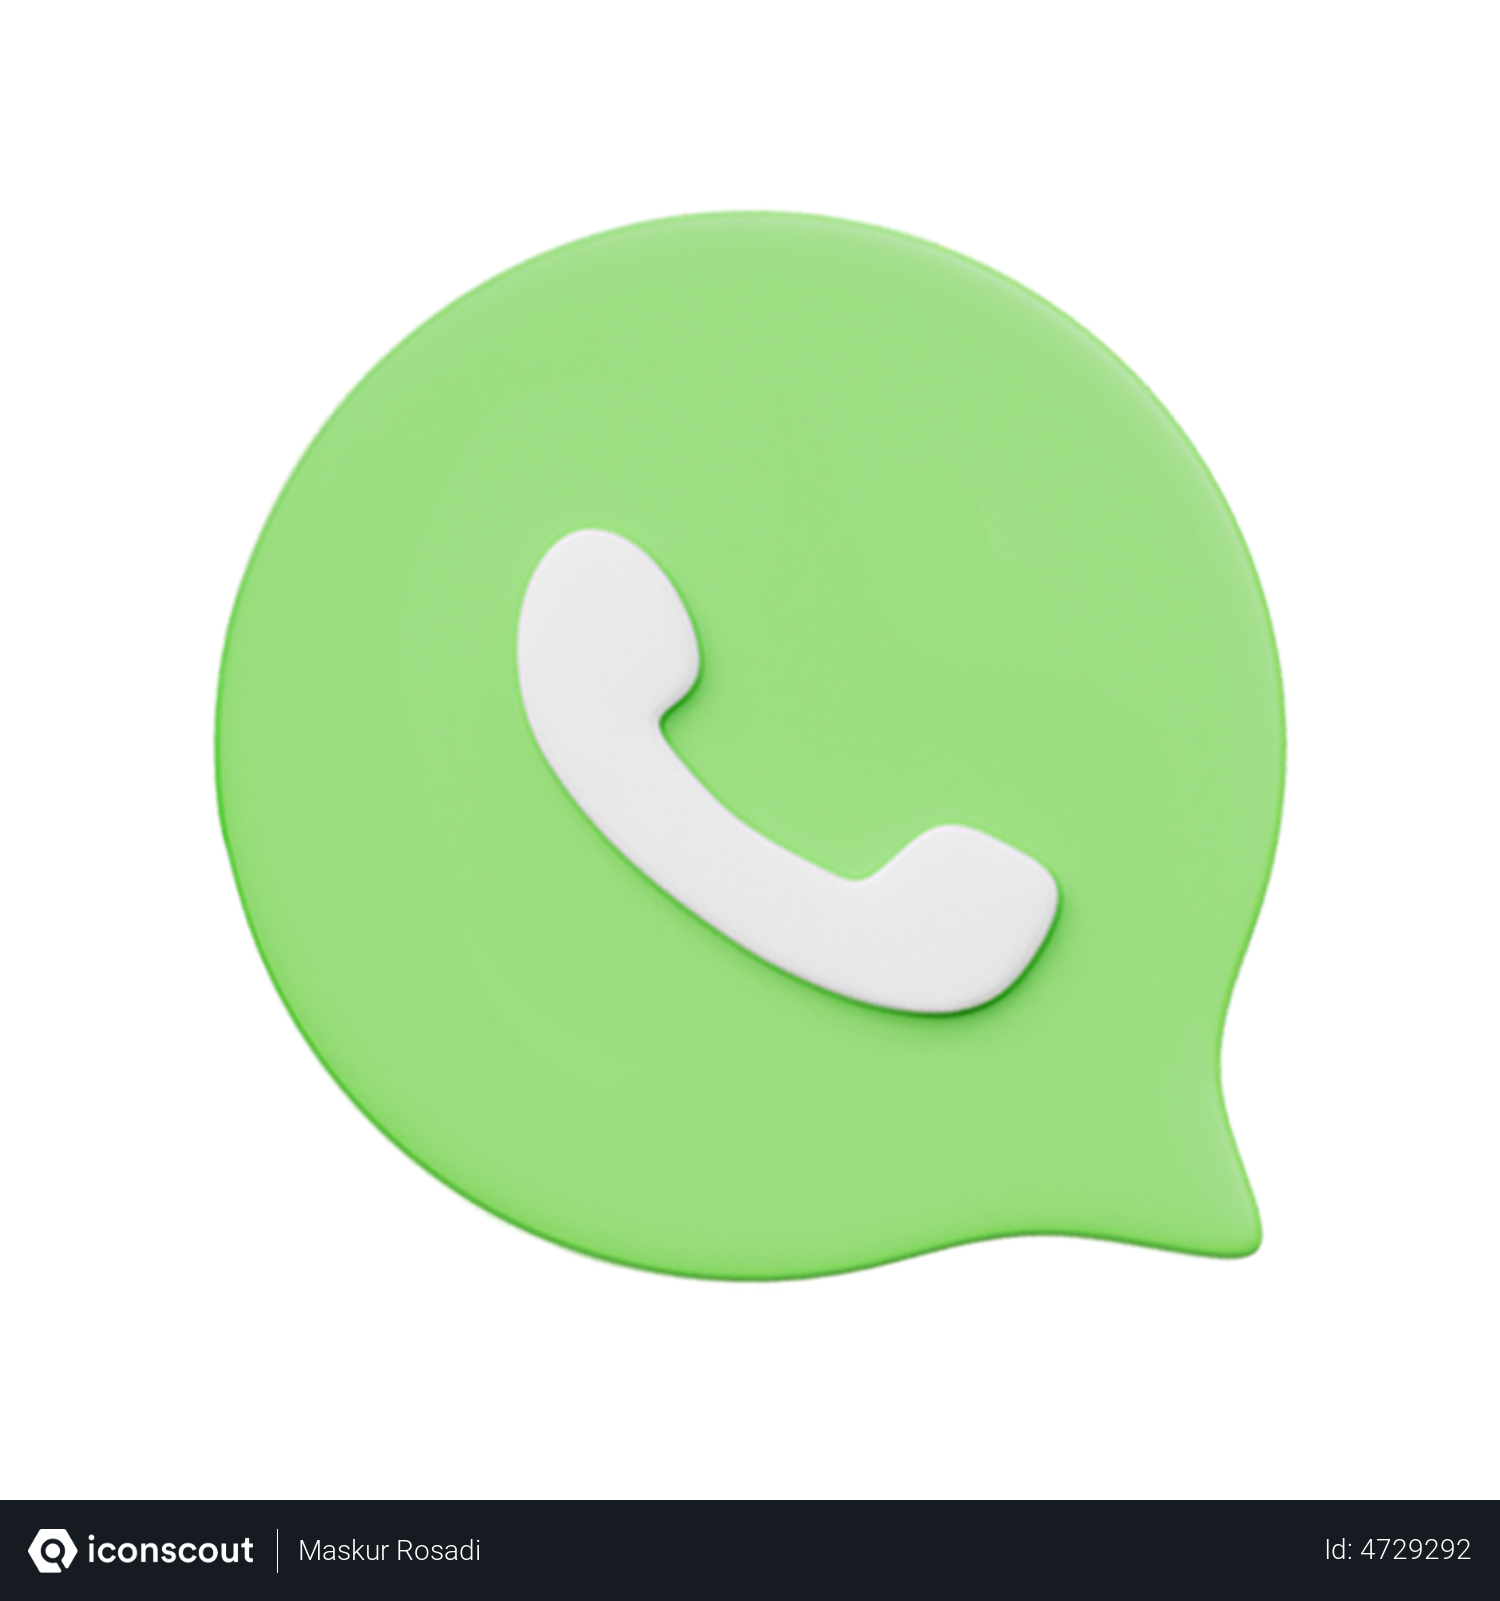 126 Whatsapp Call 3D Illustrations - Free in PNG, BLEND, glTF - IconScout